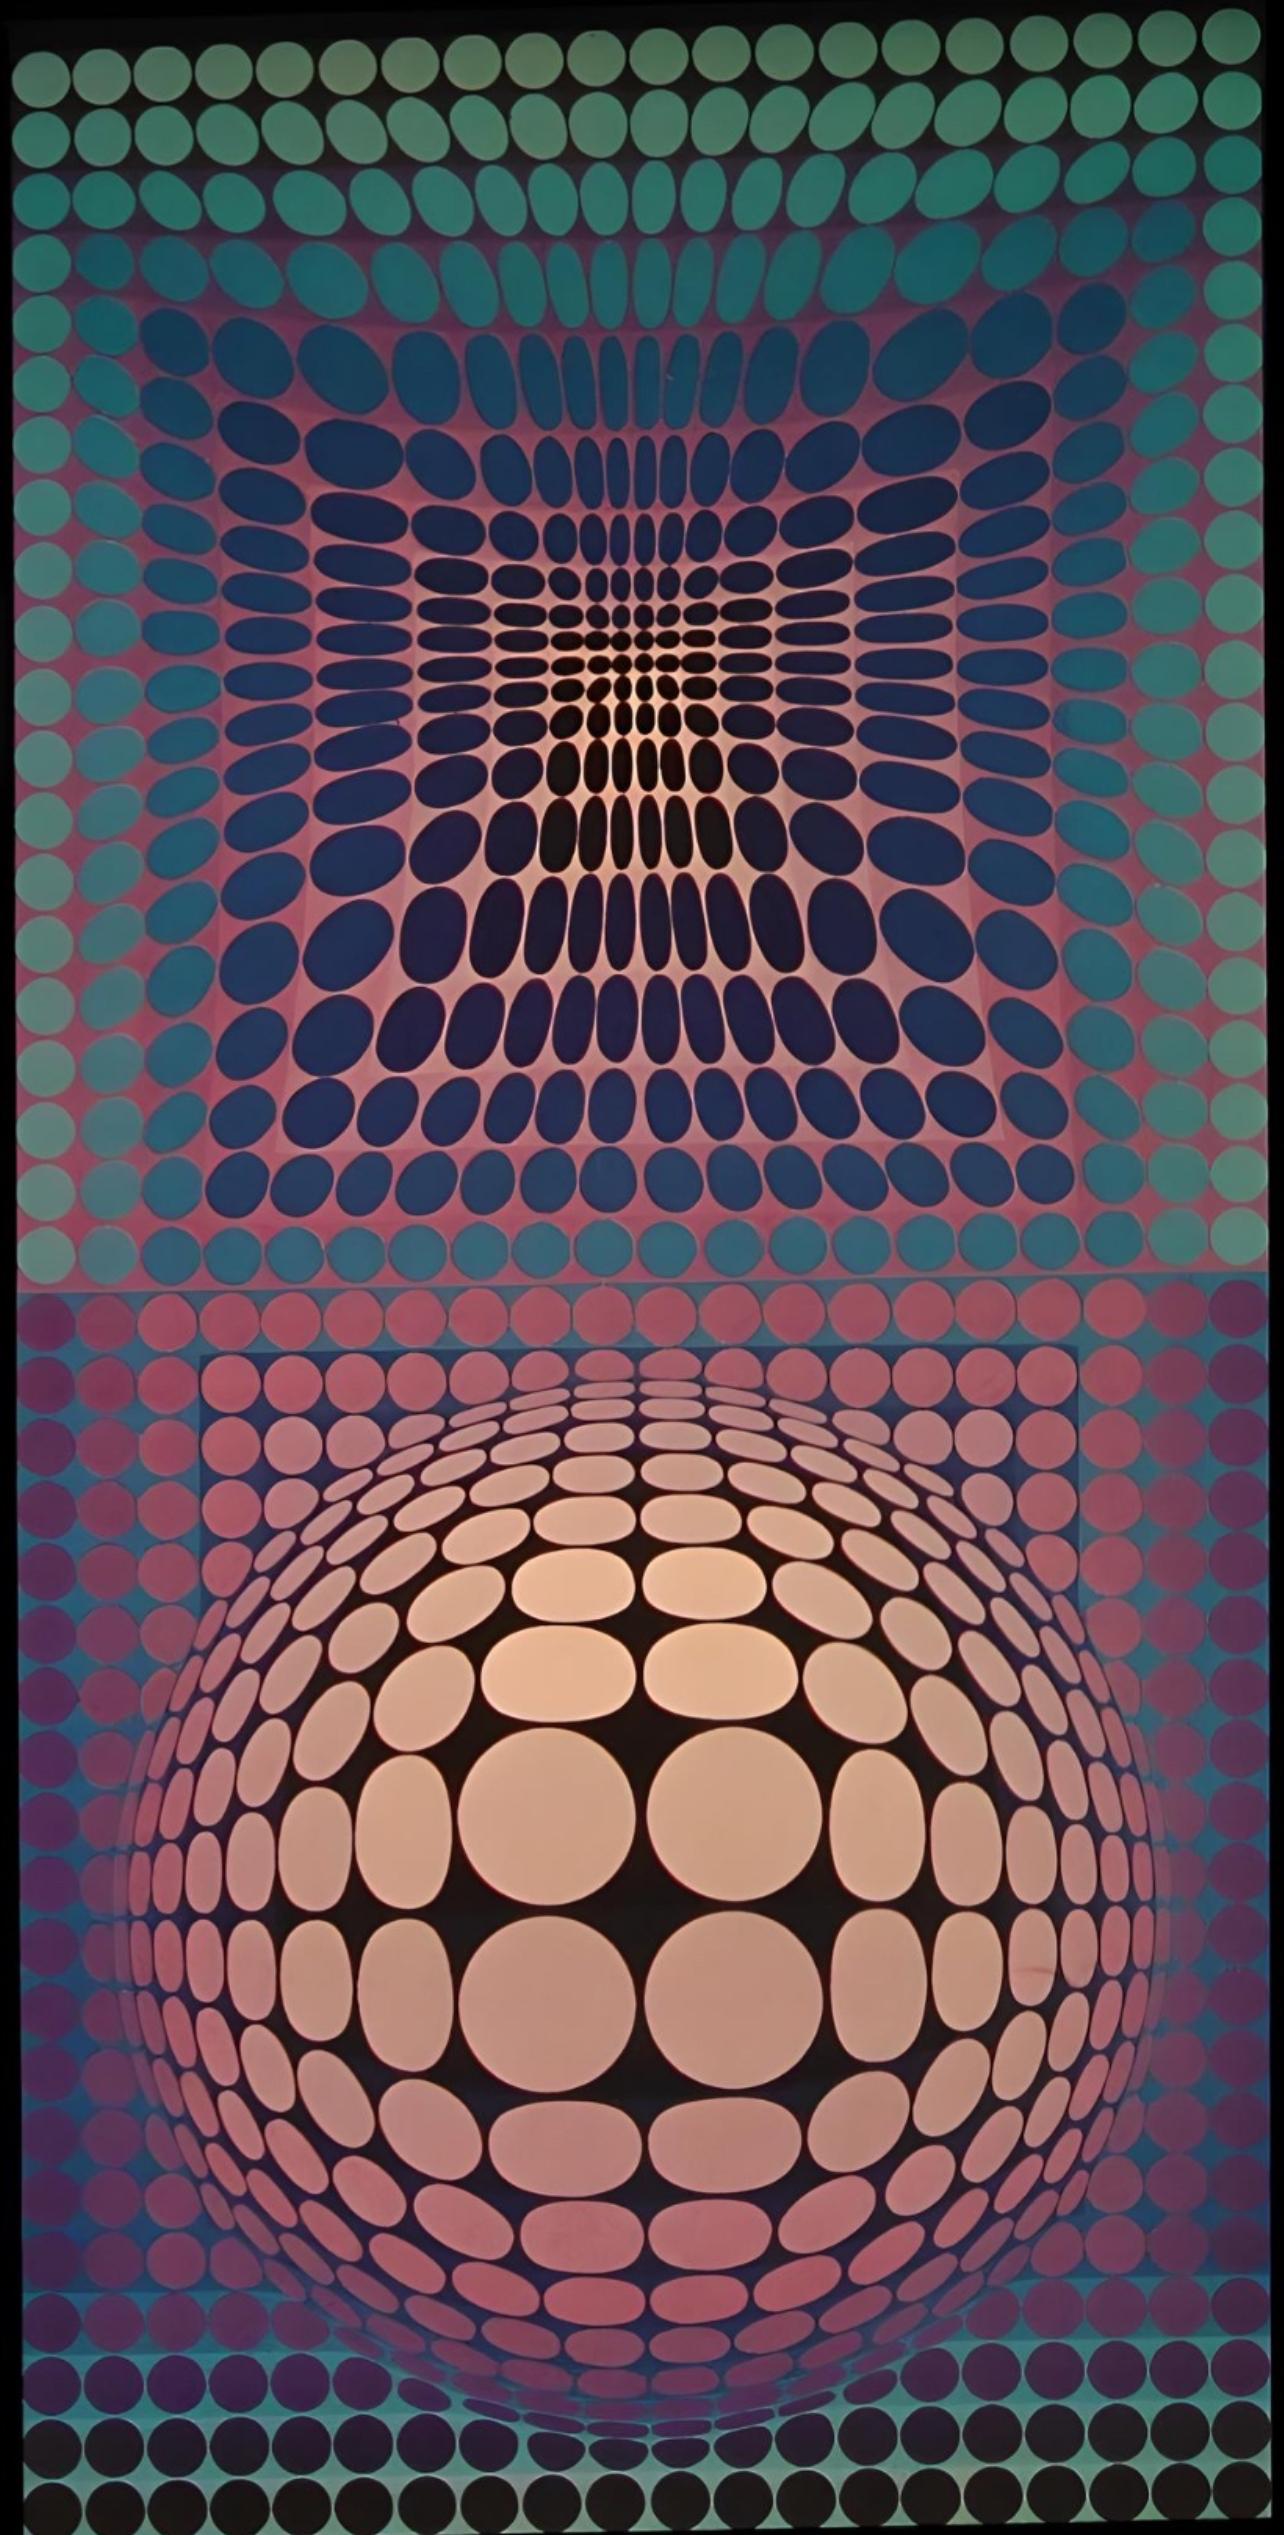 Vasarely, Composition, Structures universelles du Damier (after) - Op Art Print by Victor Vasarely